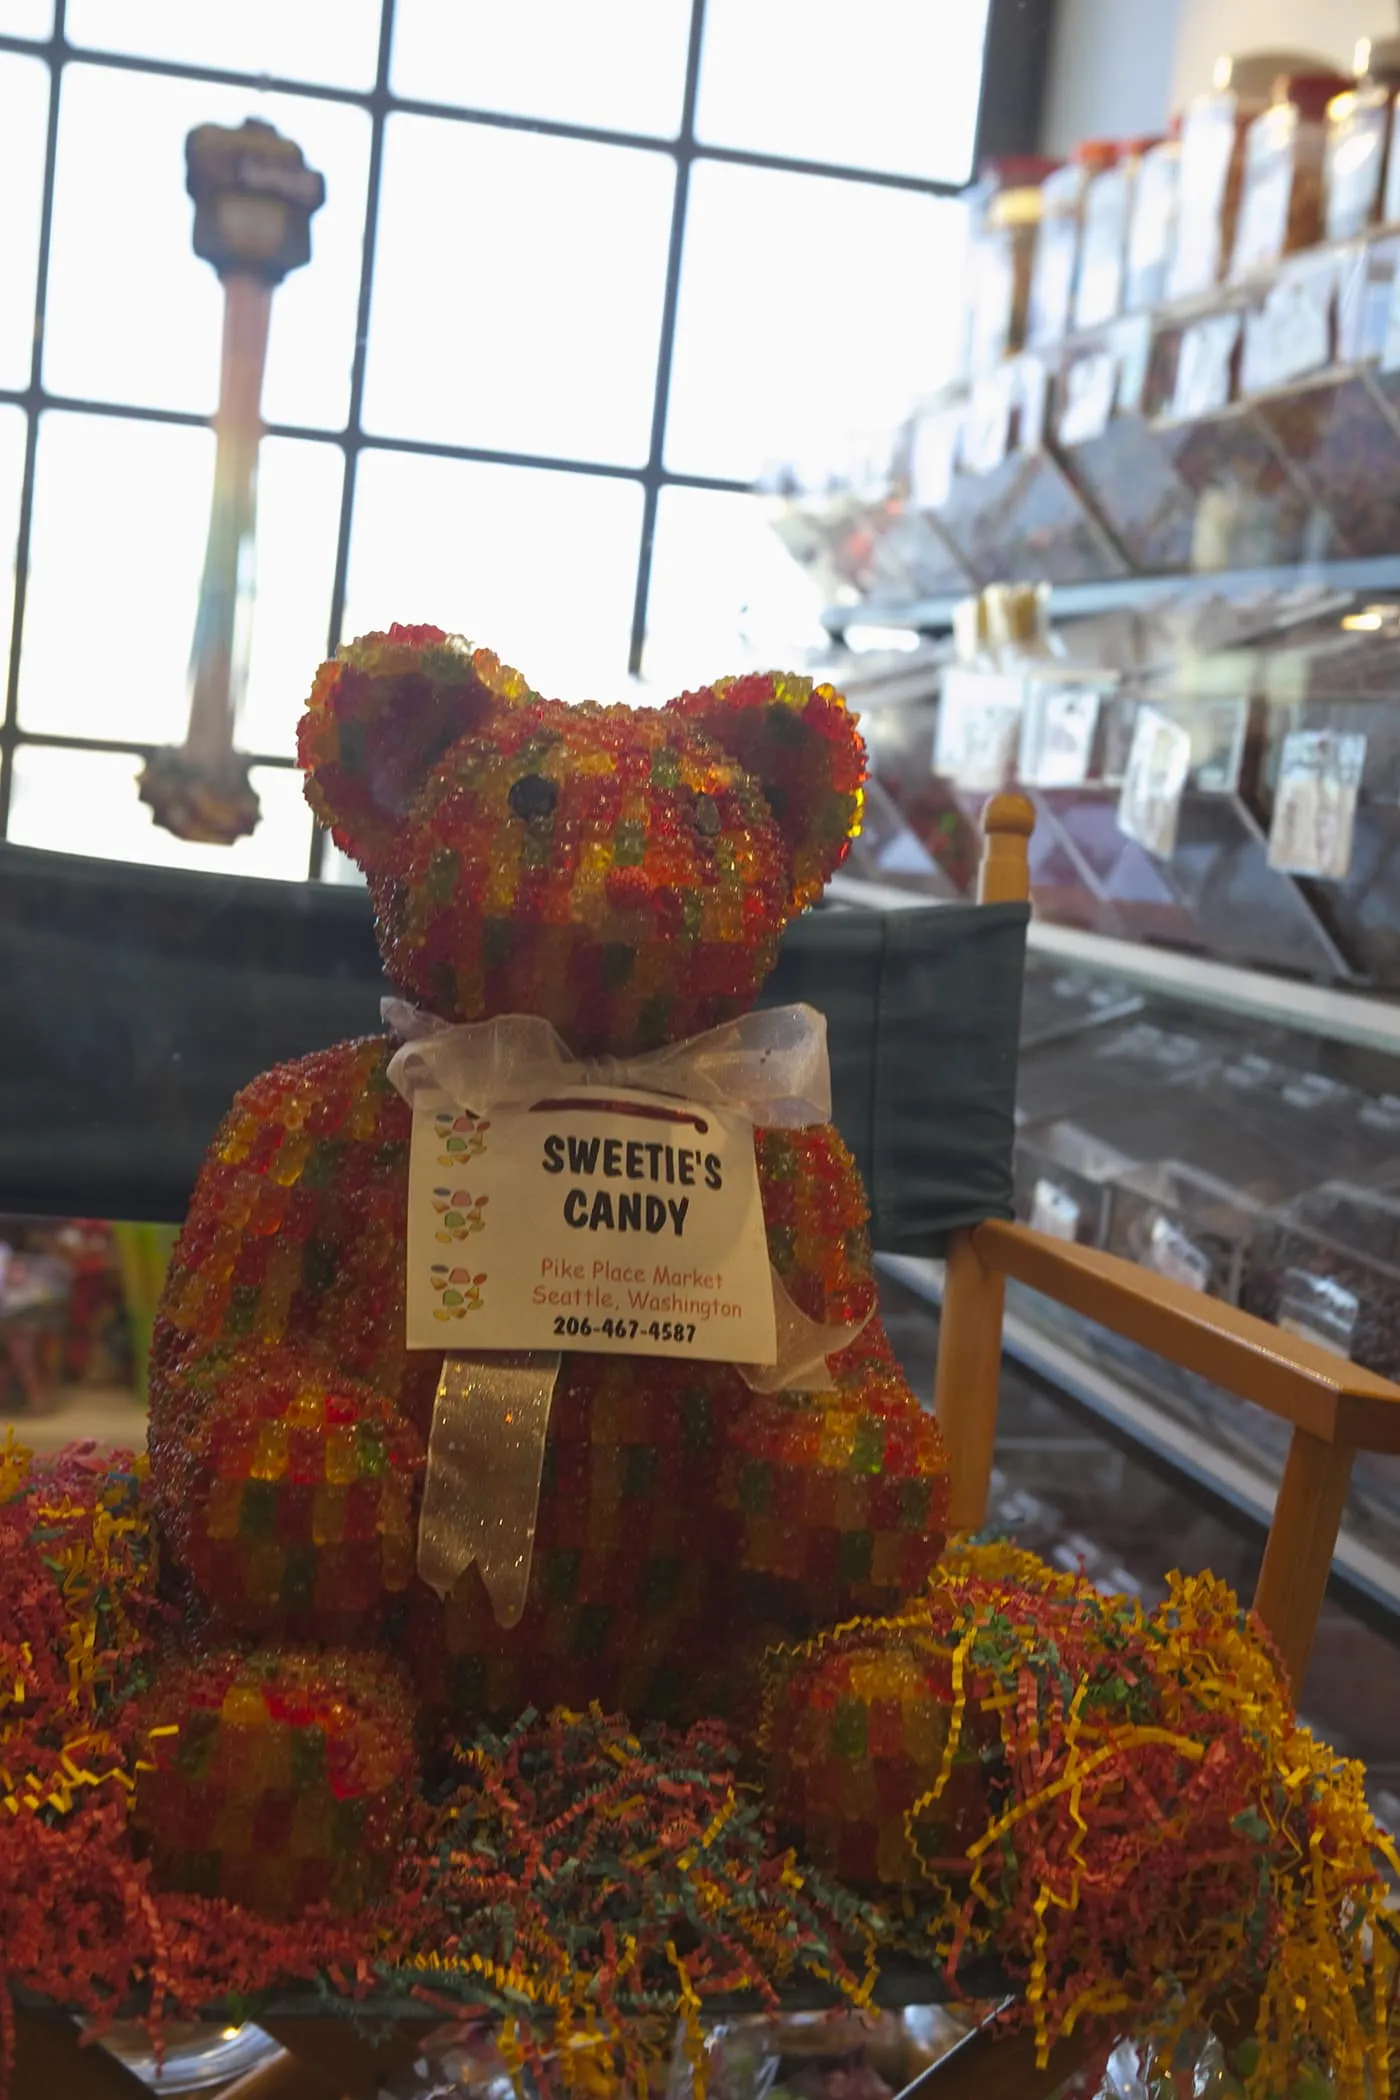 Giant Gummy Bear made from Gummy Bears at Sweetie's Candy in Pike Place Market in Seattle, Washington.